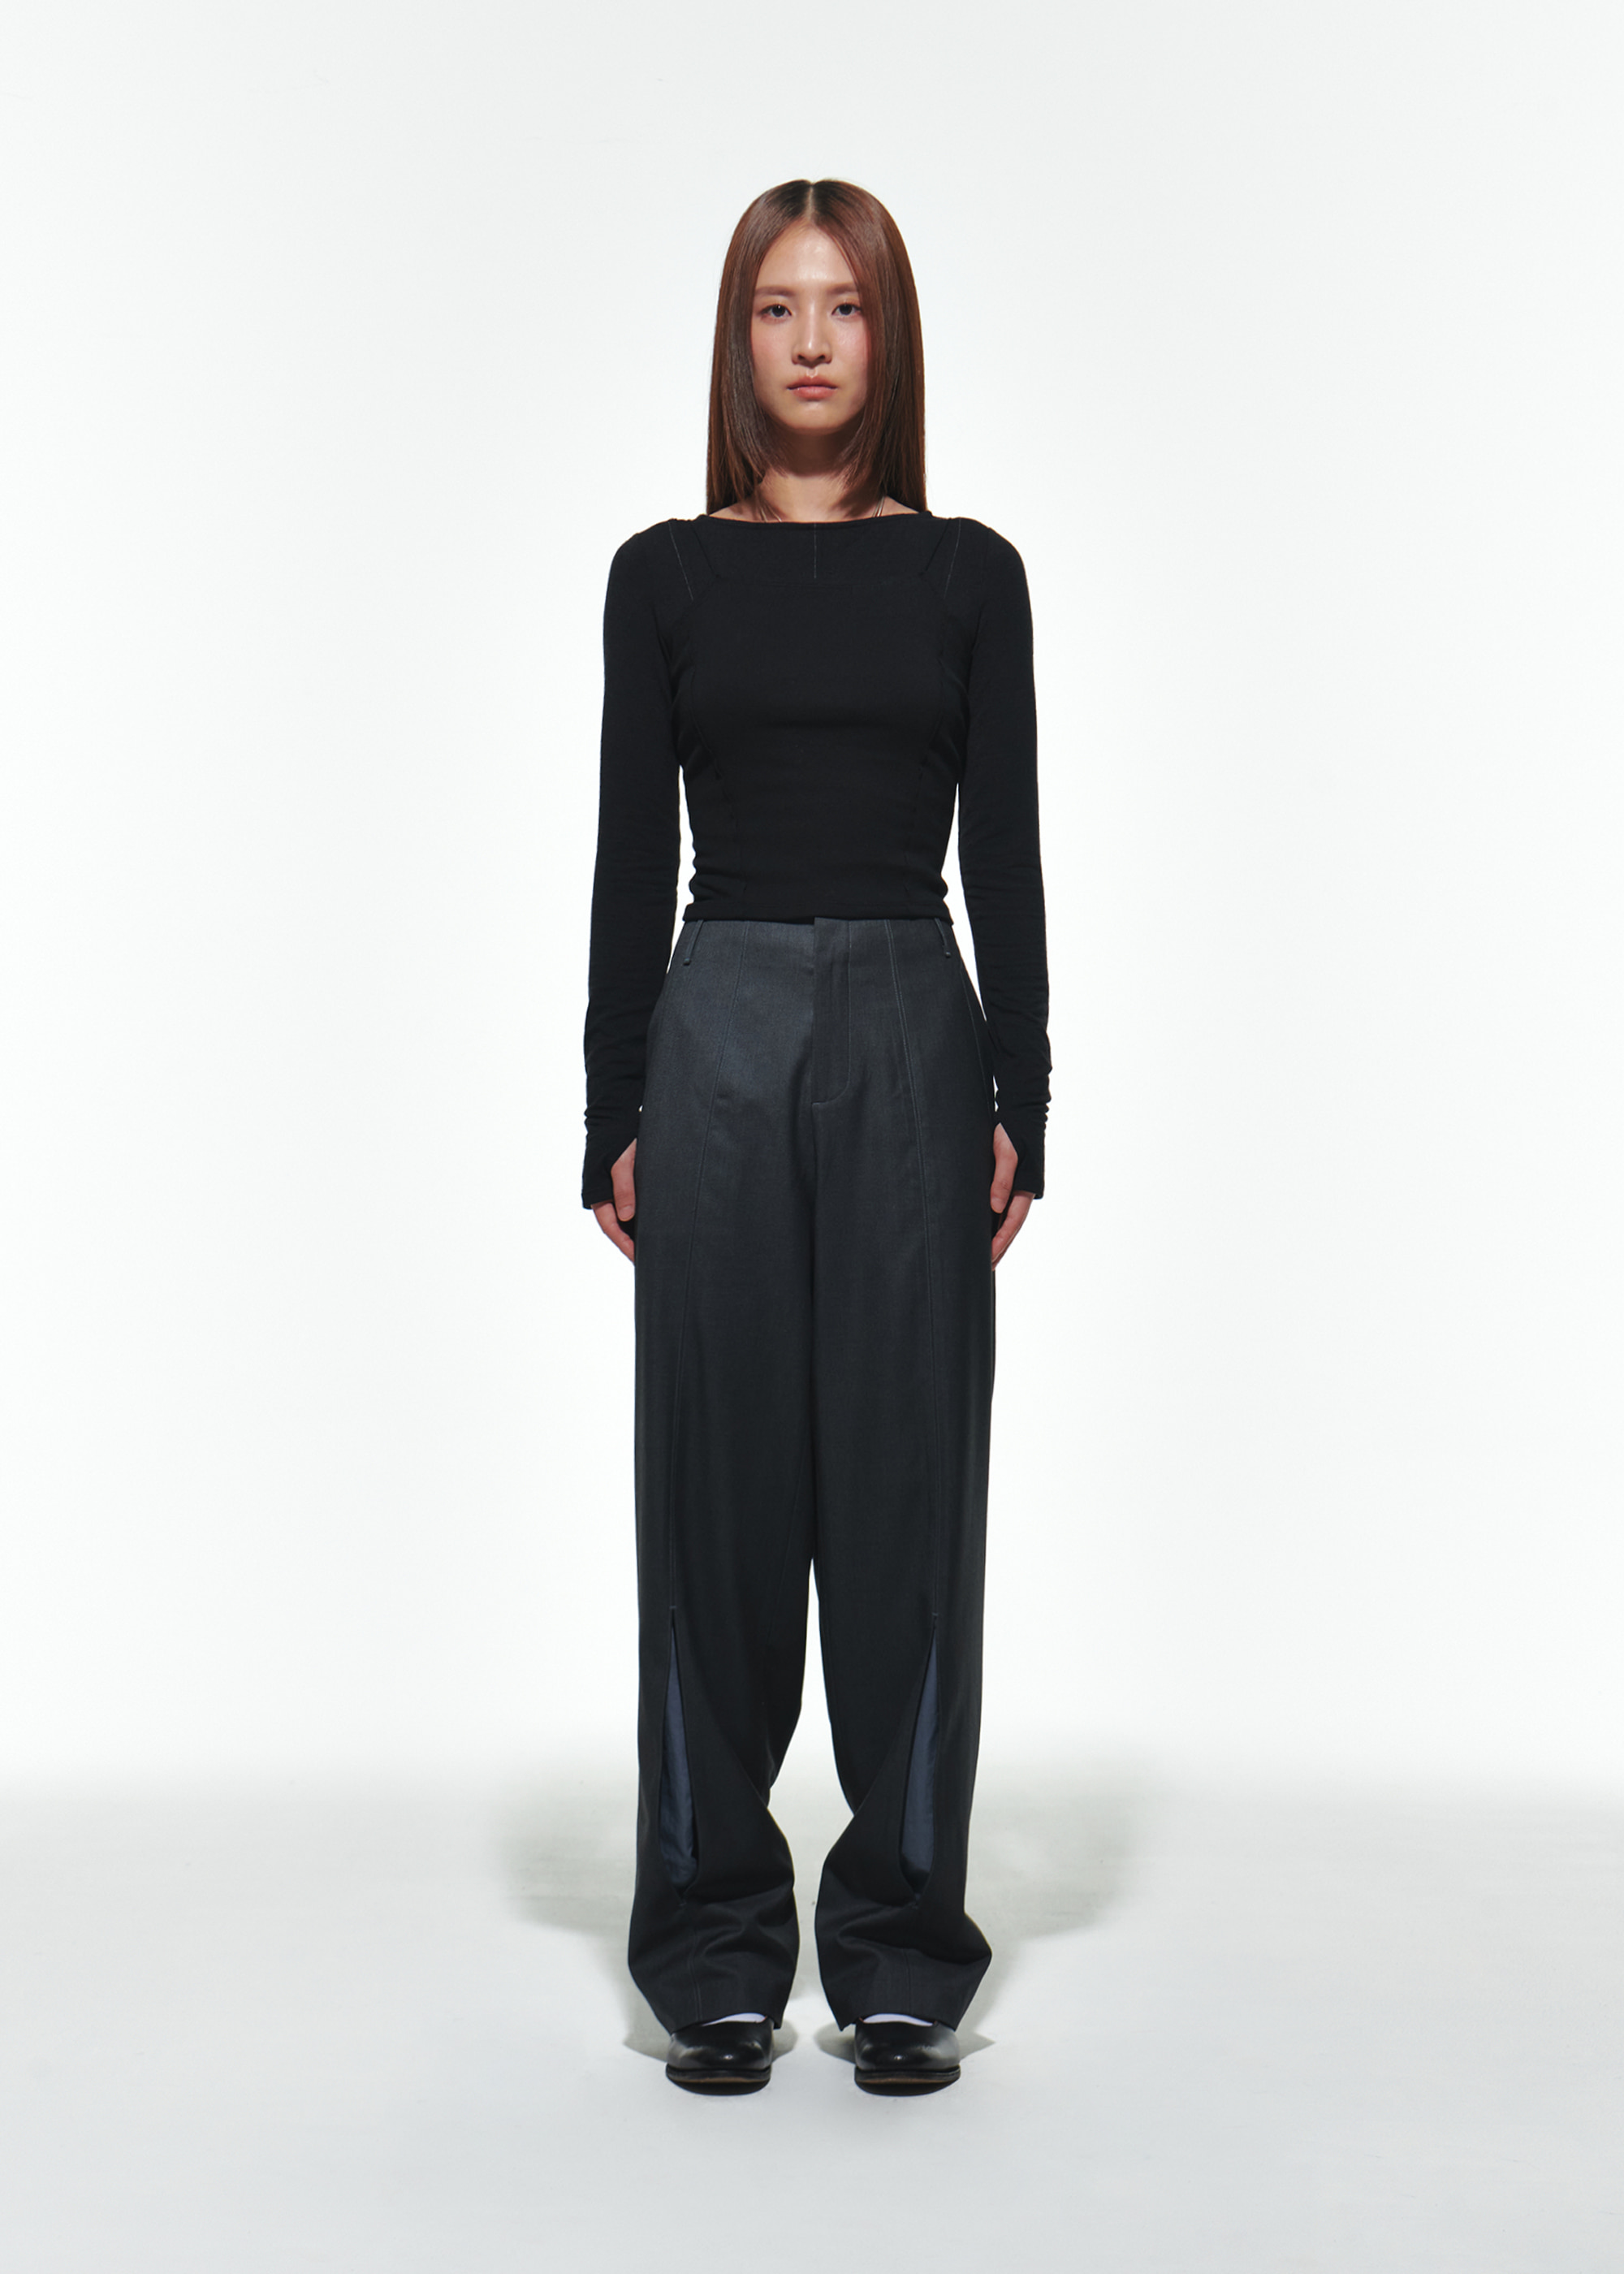 Cut out Trousers [Charcoal]